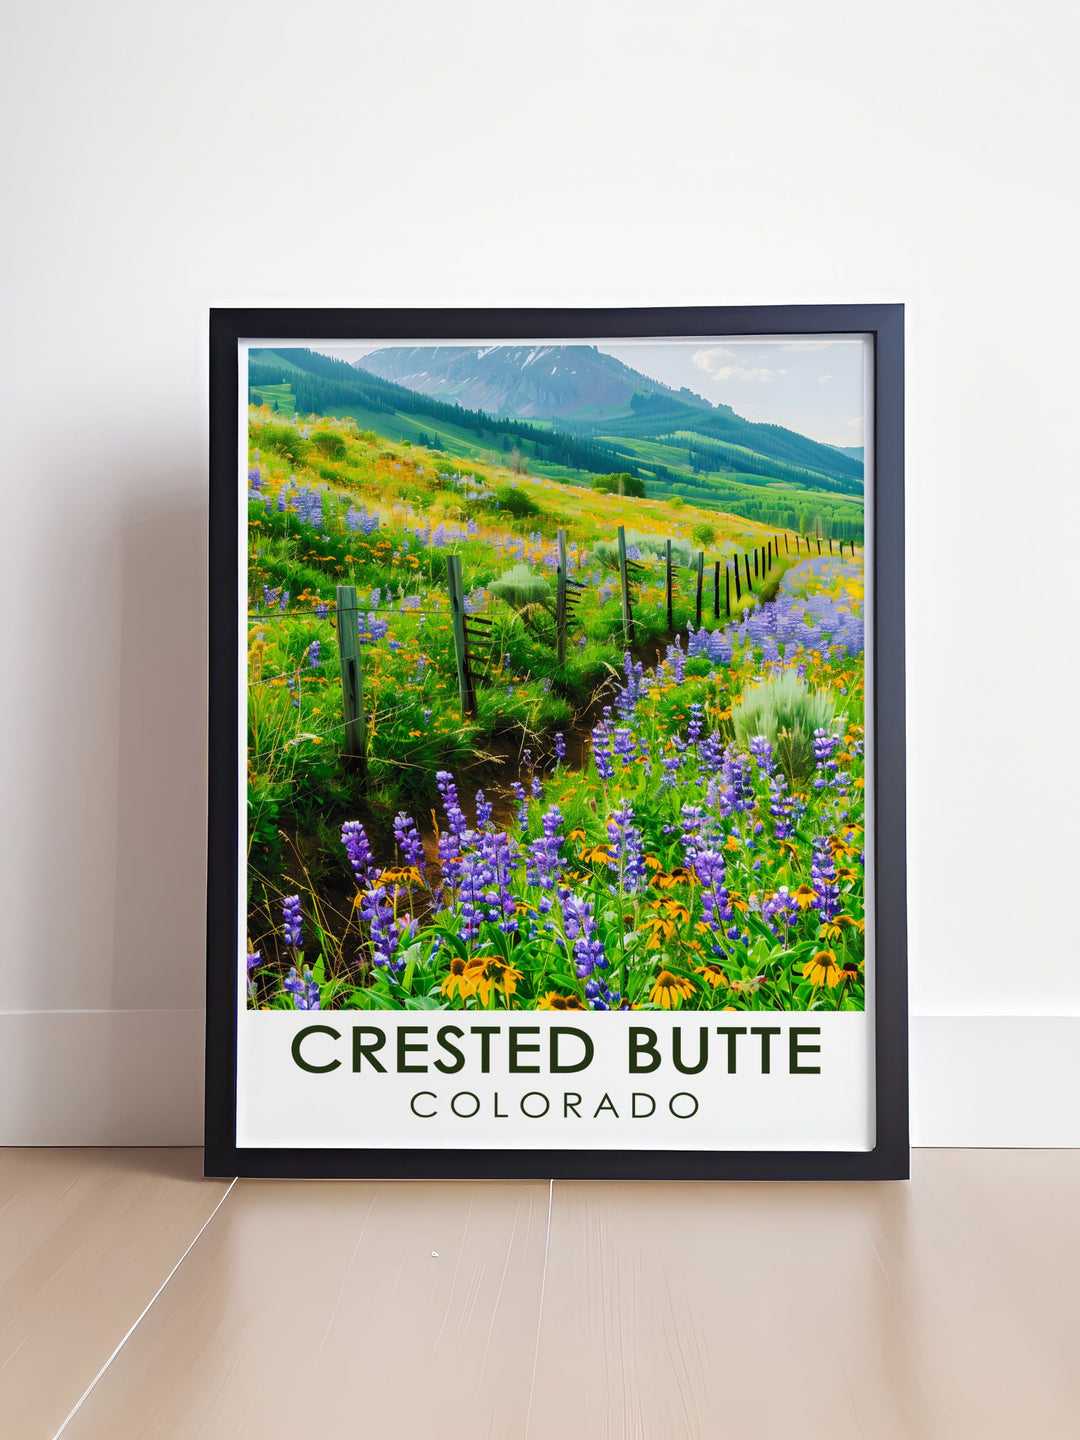 Historic Downtown vintage print of Crested Butte highlighting the towns historic architecture and scenic landscapes perfect for Colorado home decor adding a touch of nostalgia and beauty to any space in your home.